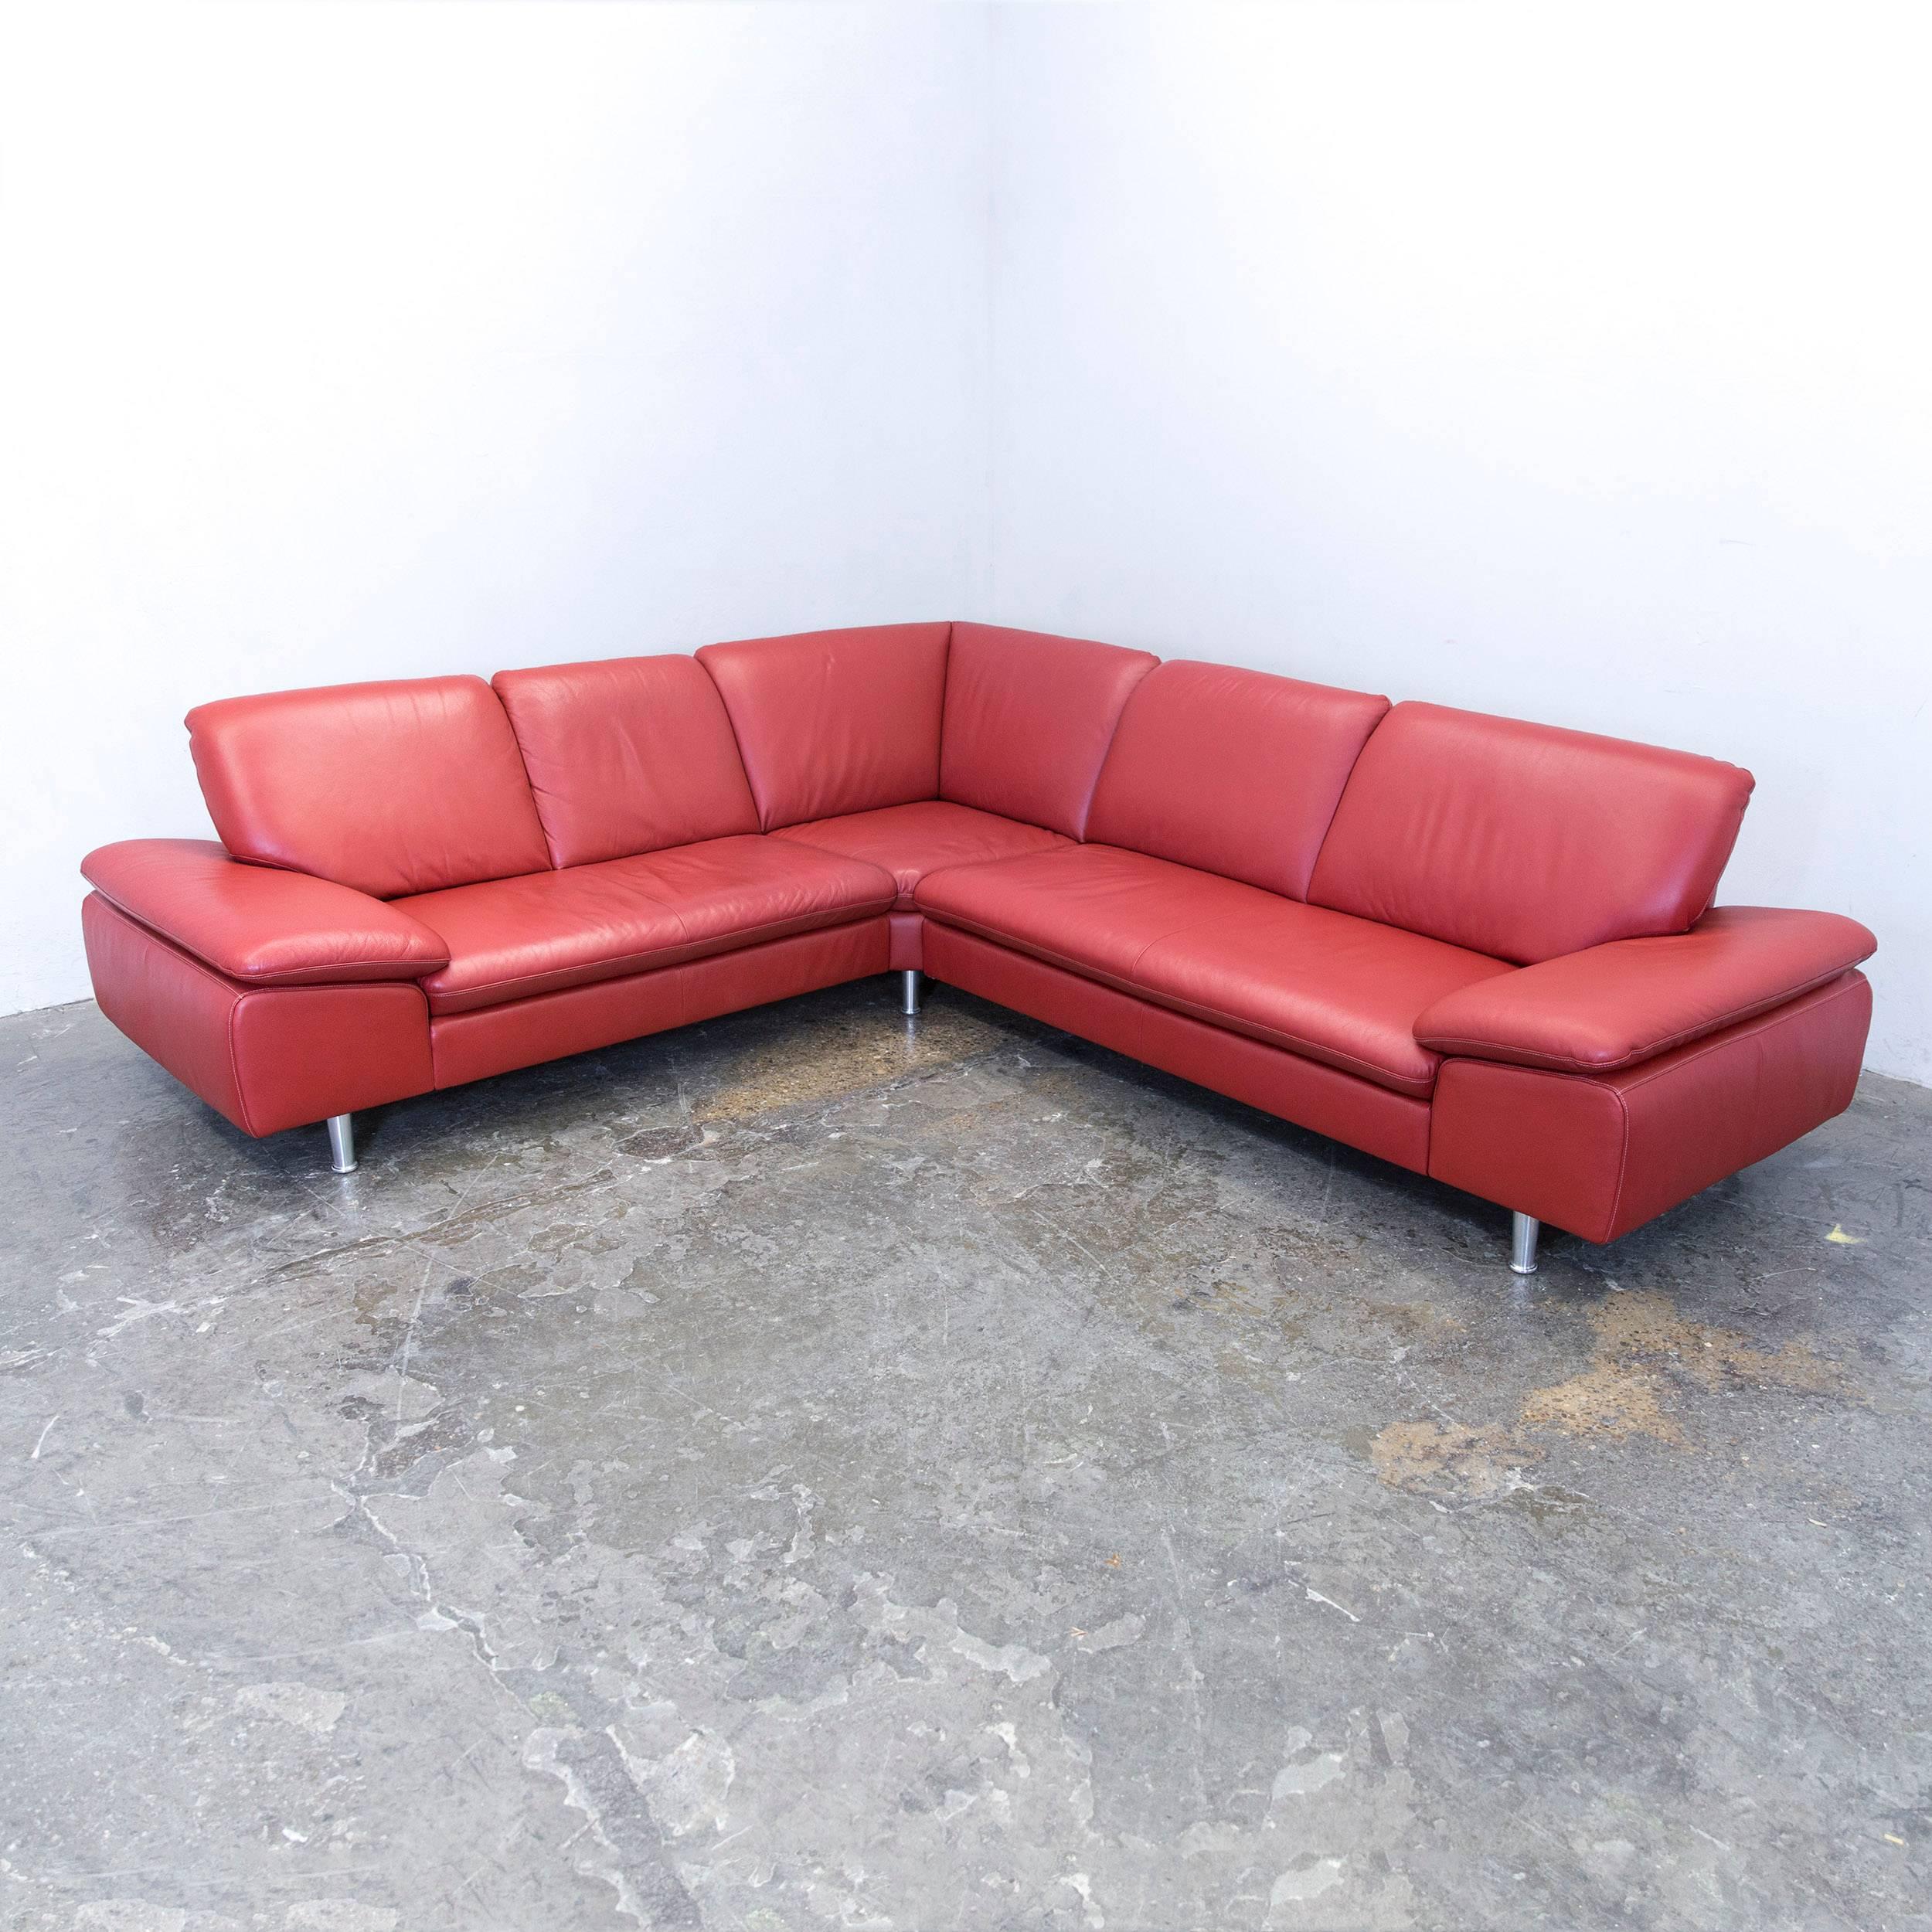 Willi Schillig Loop Designer Corner Sofa Leather Red Couch Modern In Good Condition For Sale In Cologne, DE